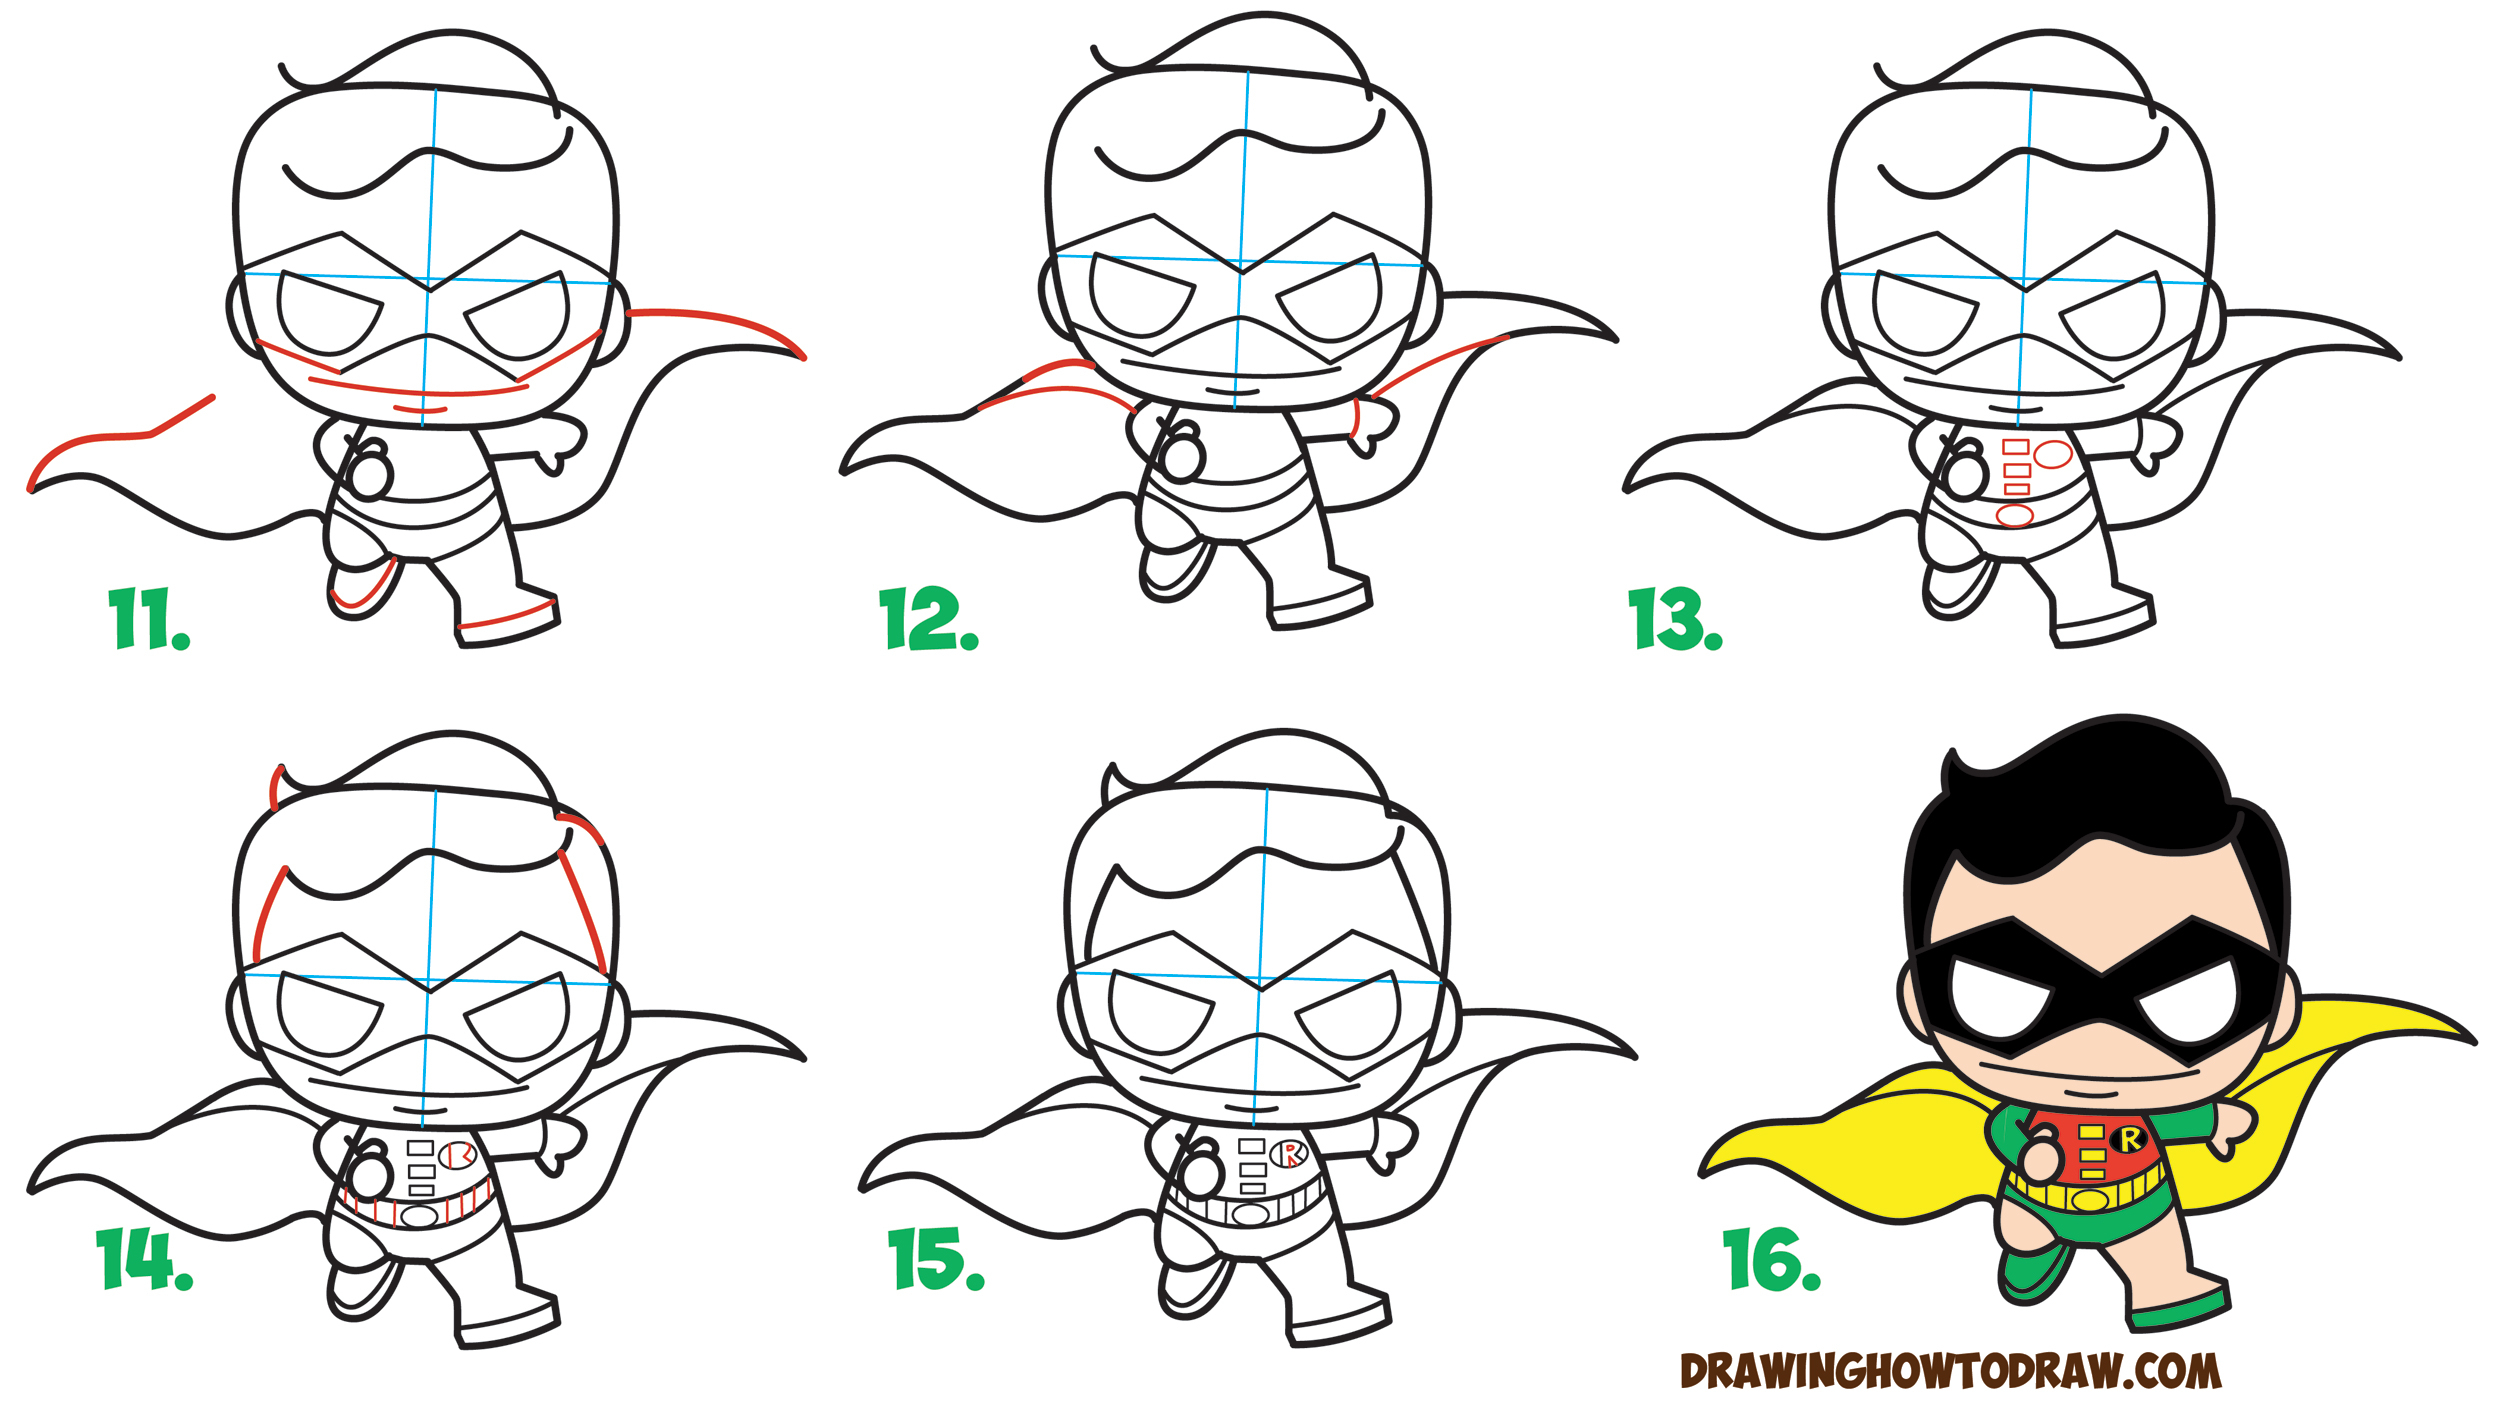 Batman Drawing Step By Step How to Draw Cute Chibi Batman from DC